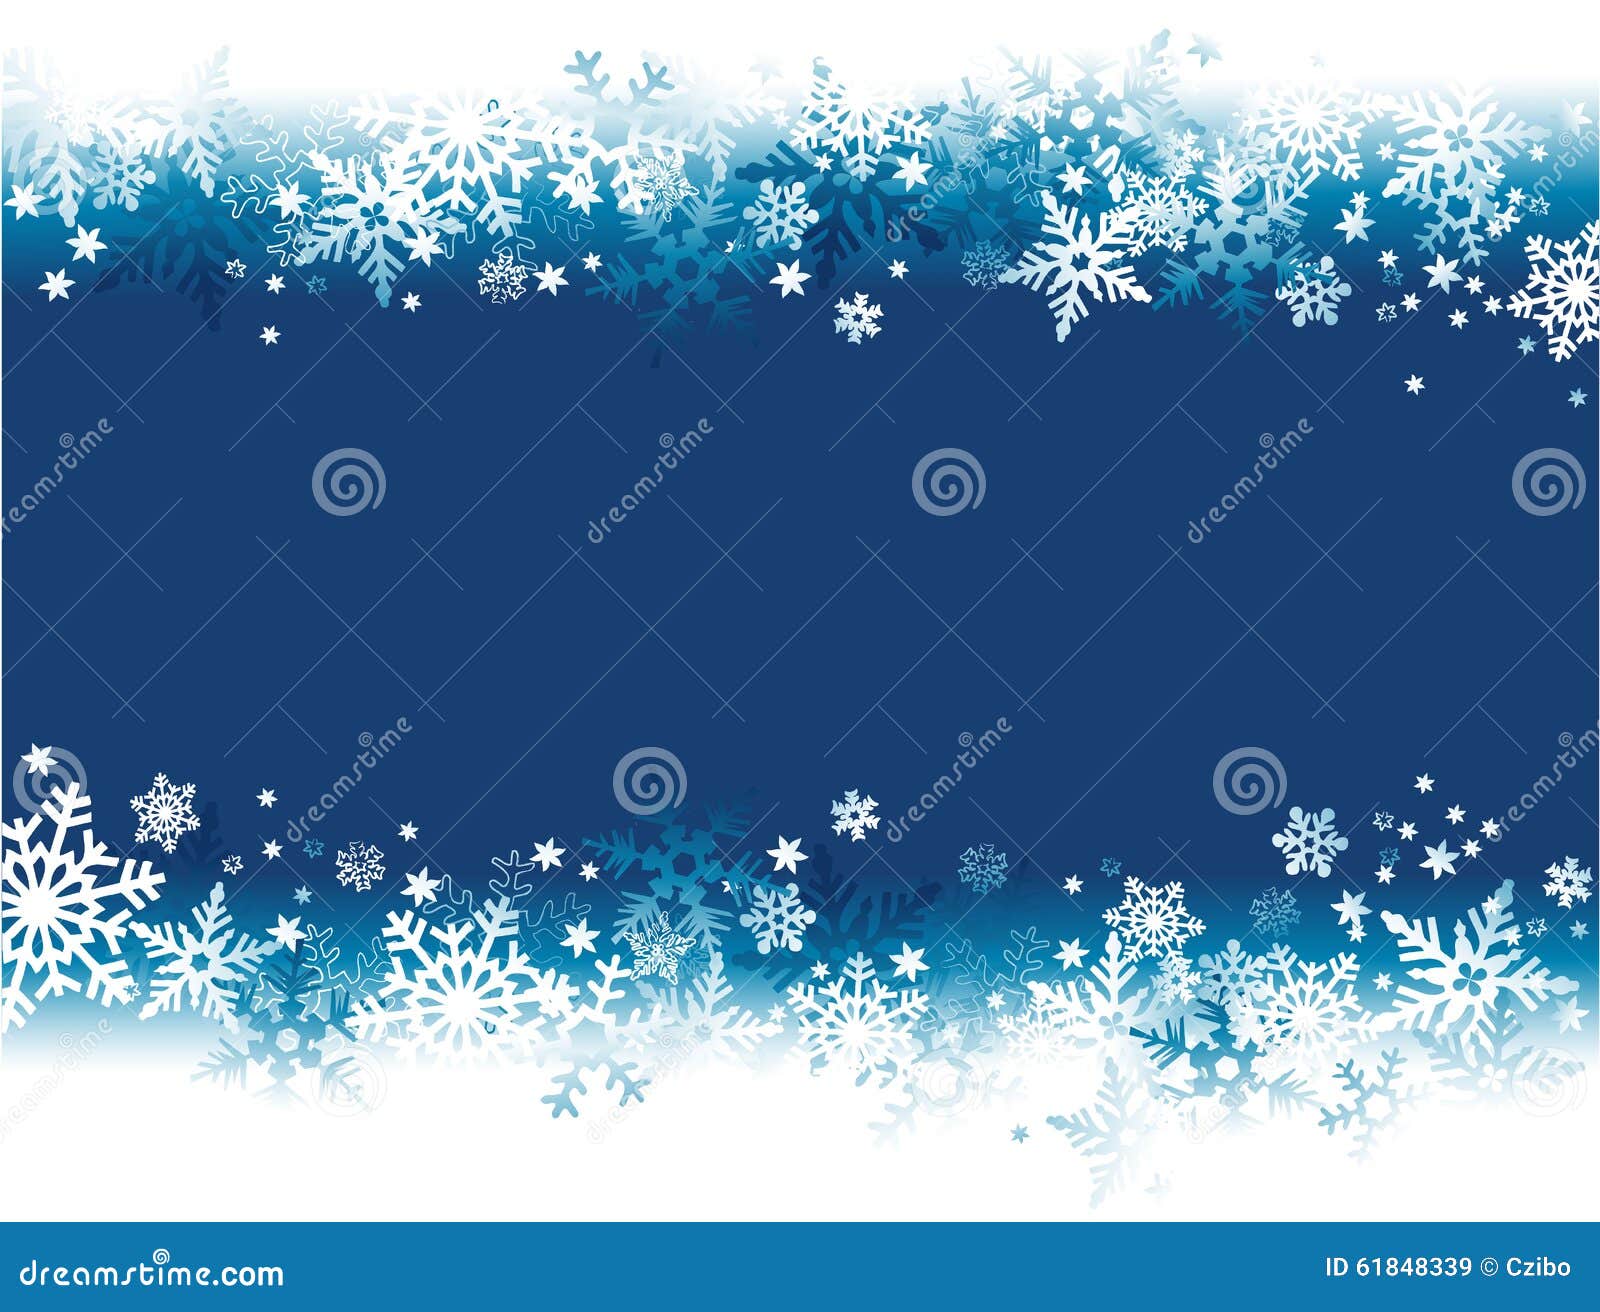 Winter holiday background with snowflakes. Winter abstract background with snowflakes